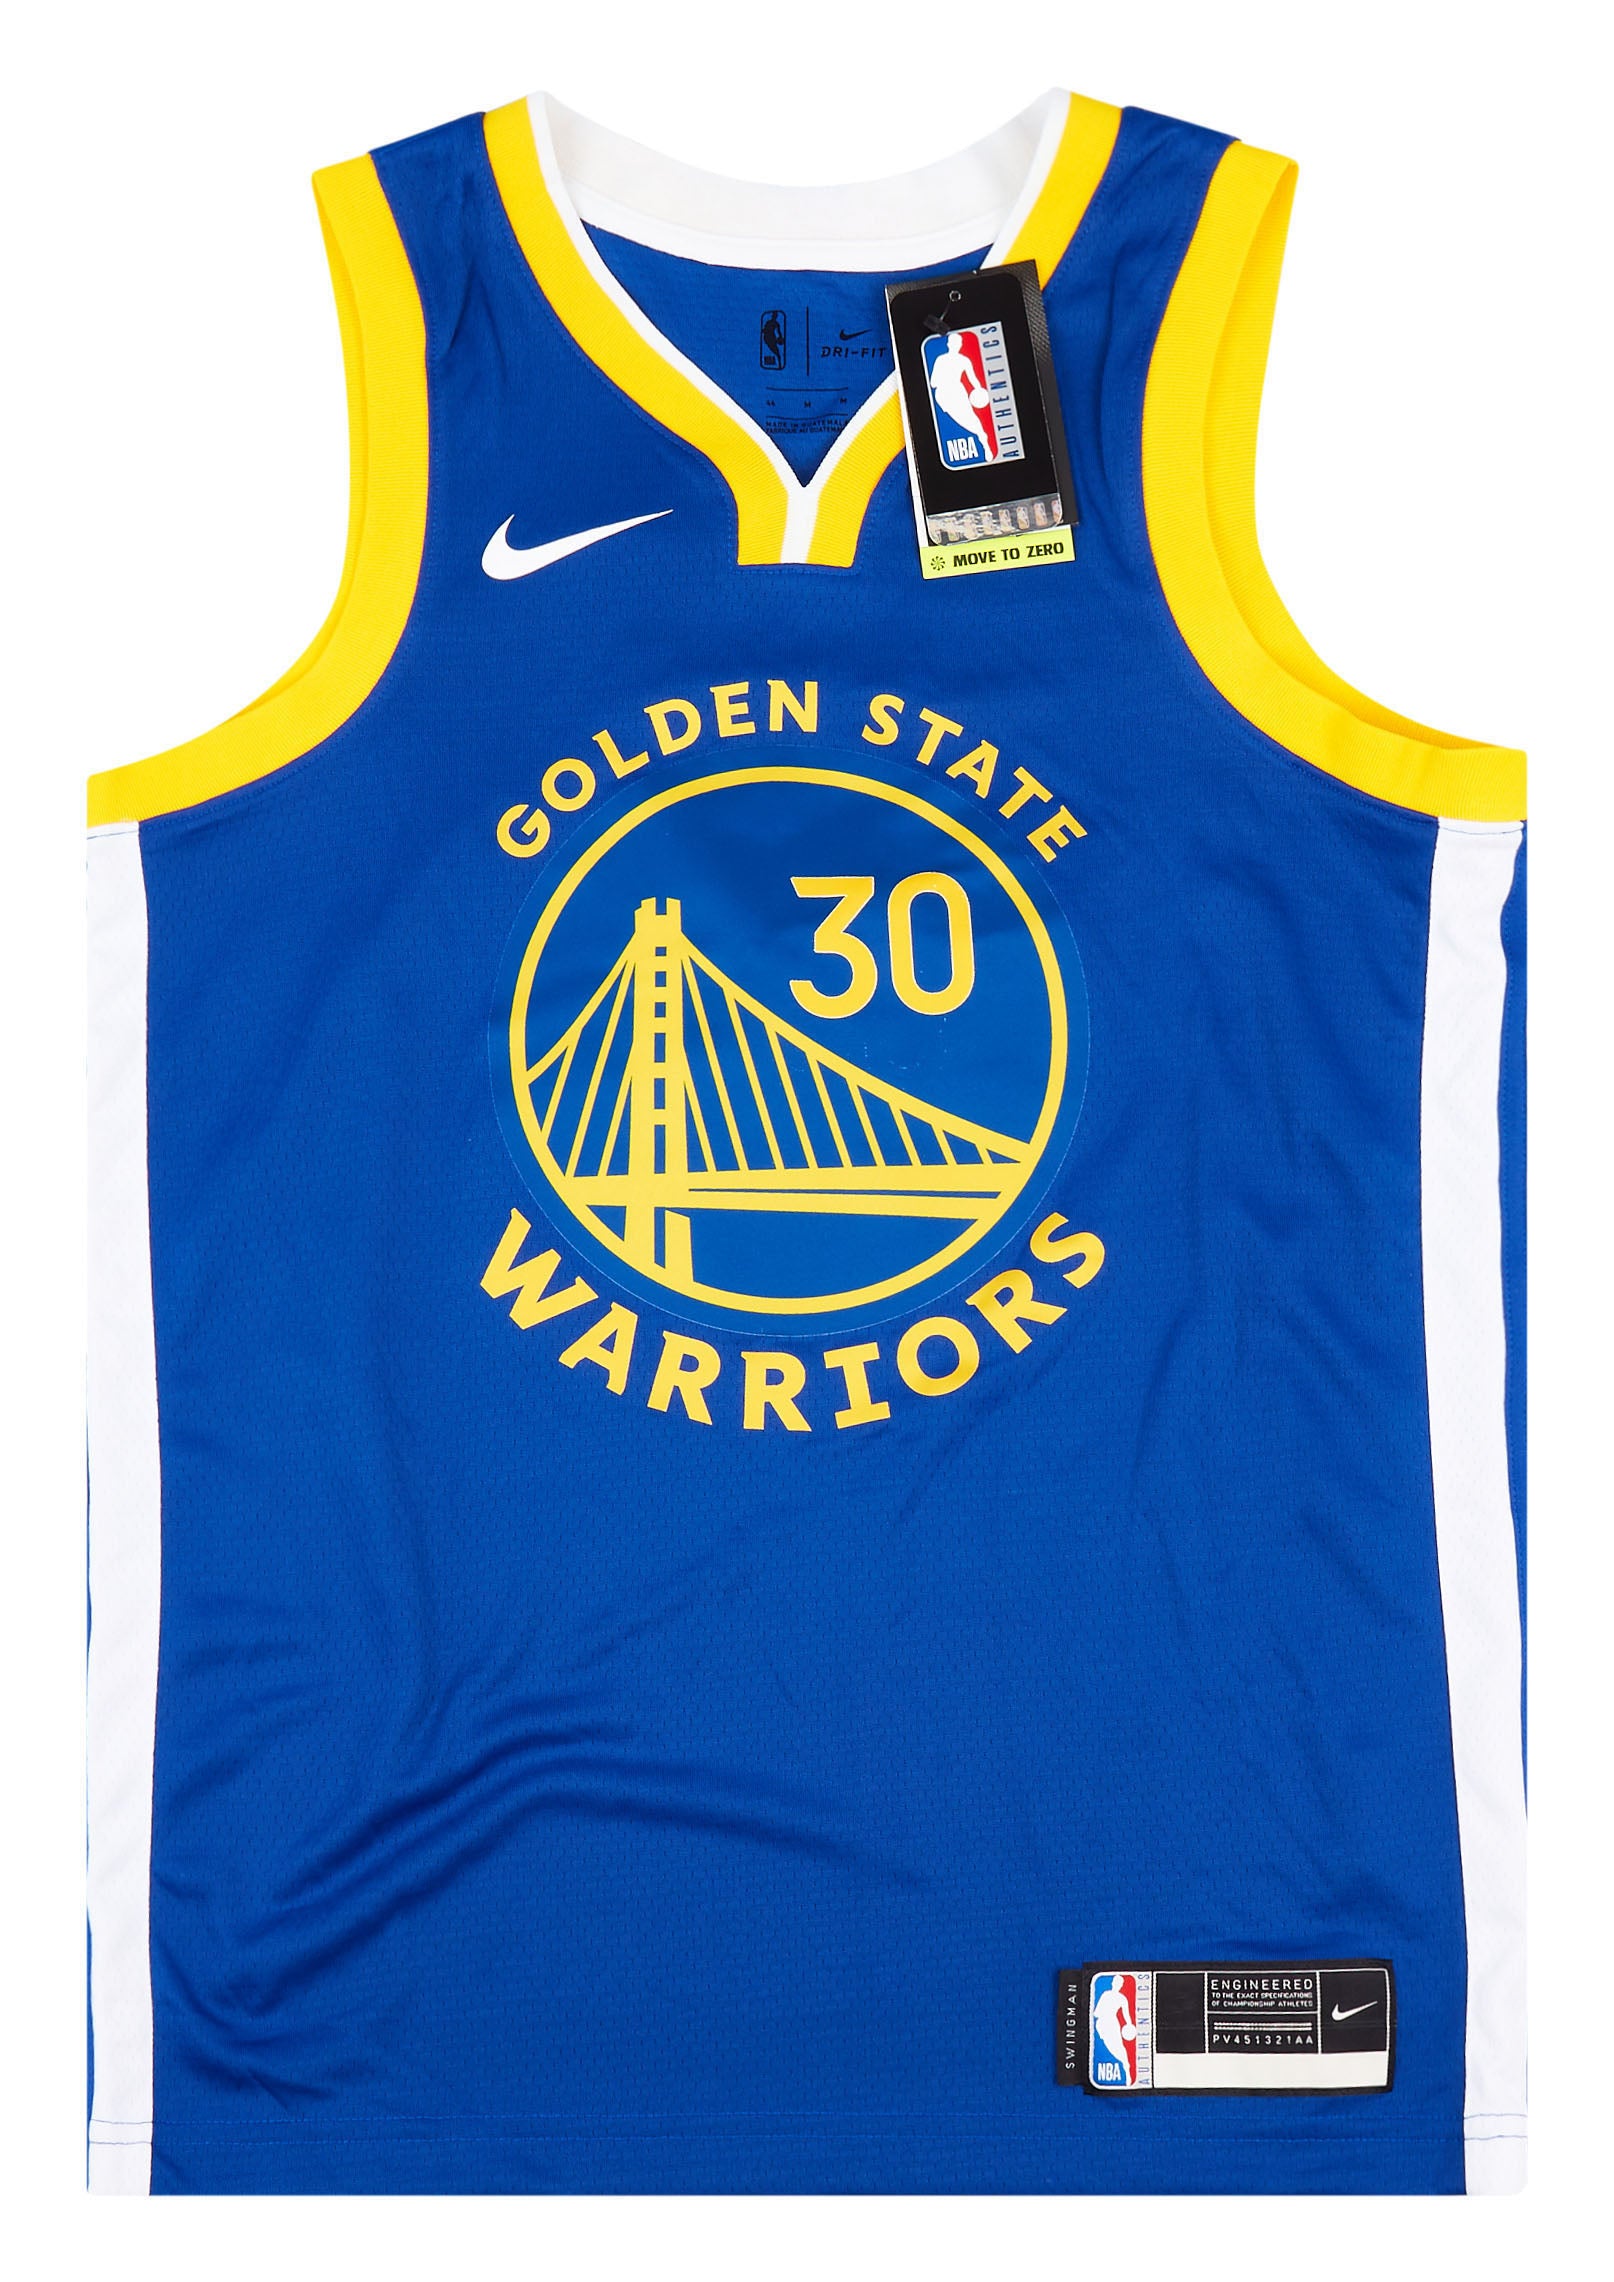 NIKE NBA GOLDEN STATE WARRIORS STEPHEN CURRY AUTHENTIC JERSEY BLUE Size 44  M